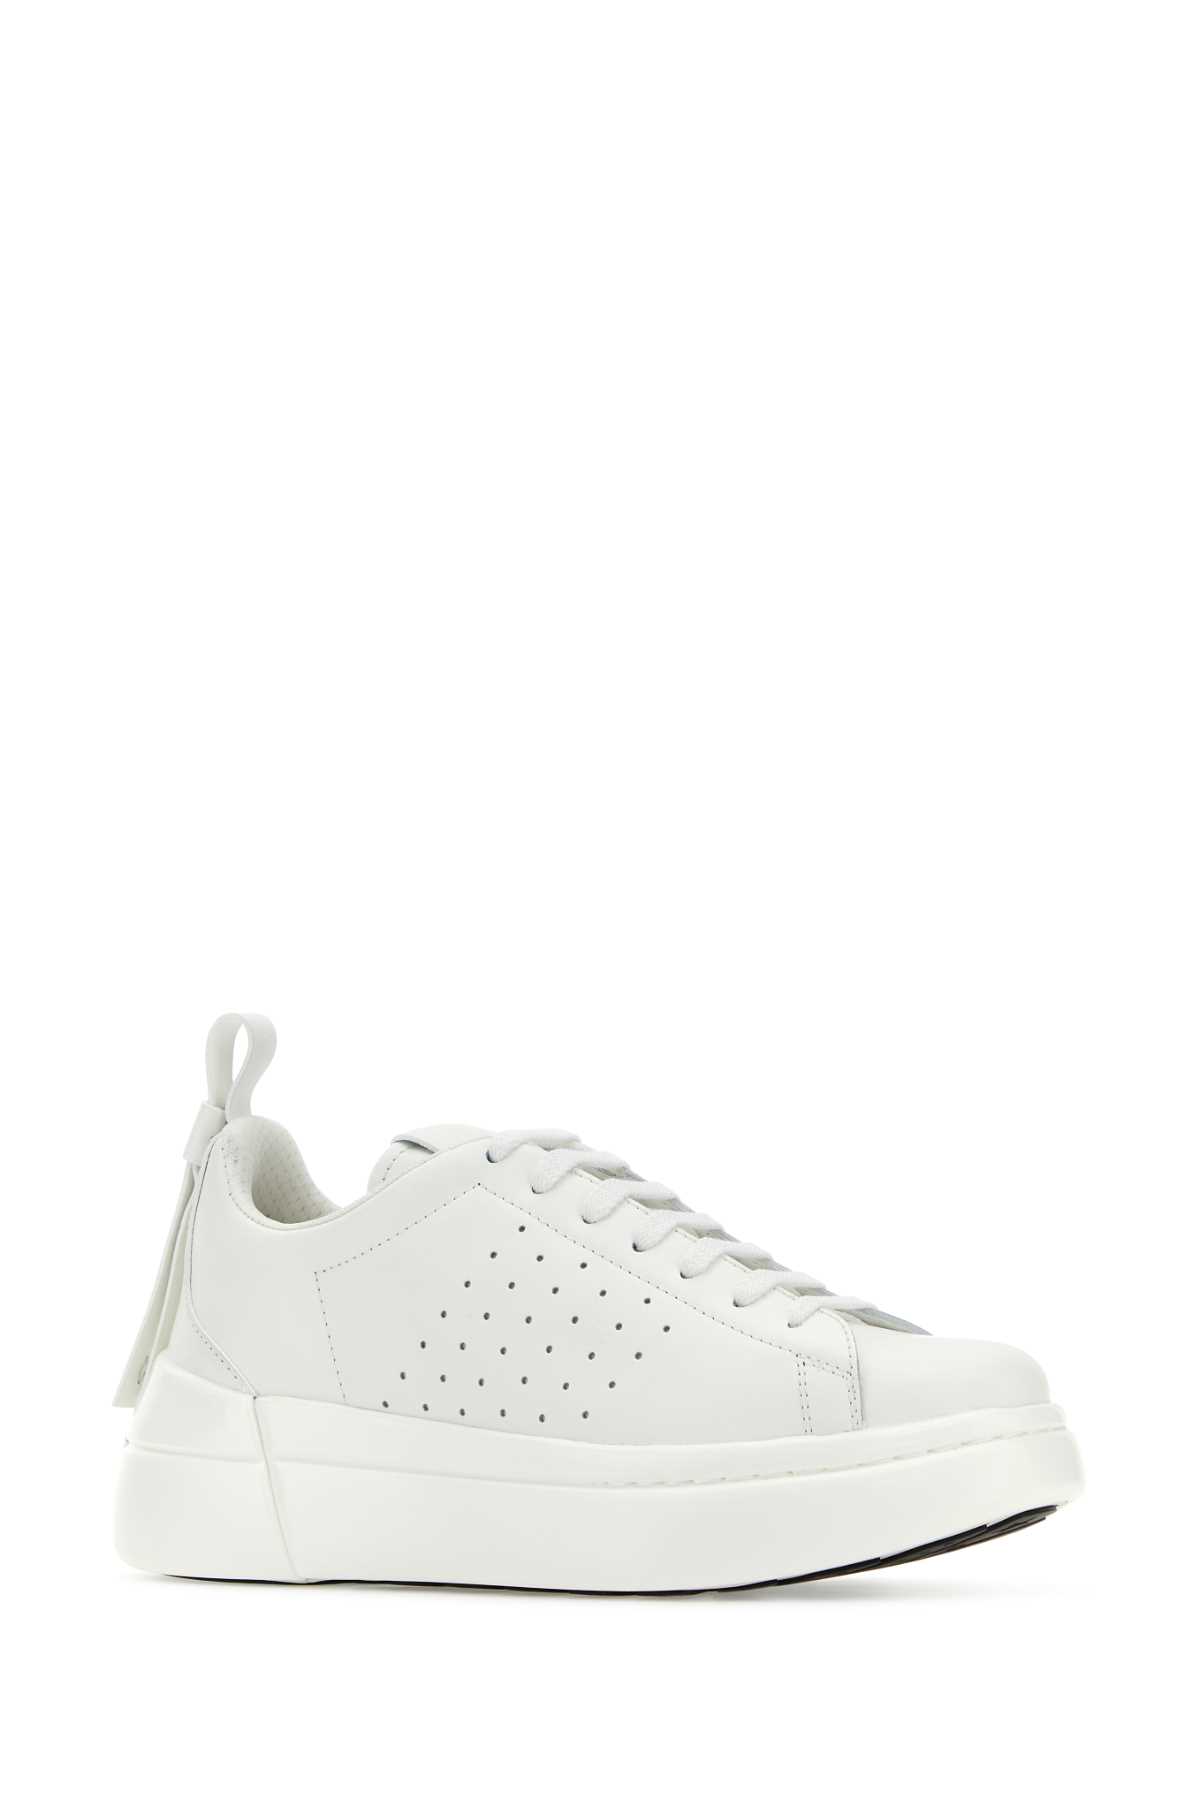 Red Valentino White Leather Bowalk Trainers In Bianco